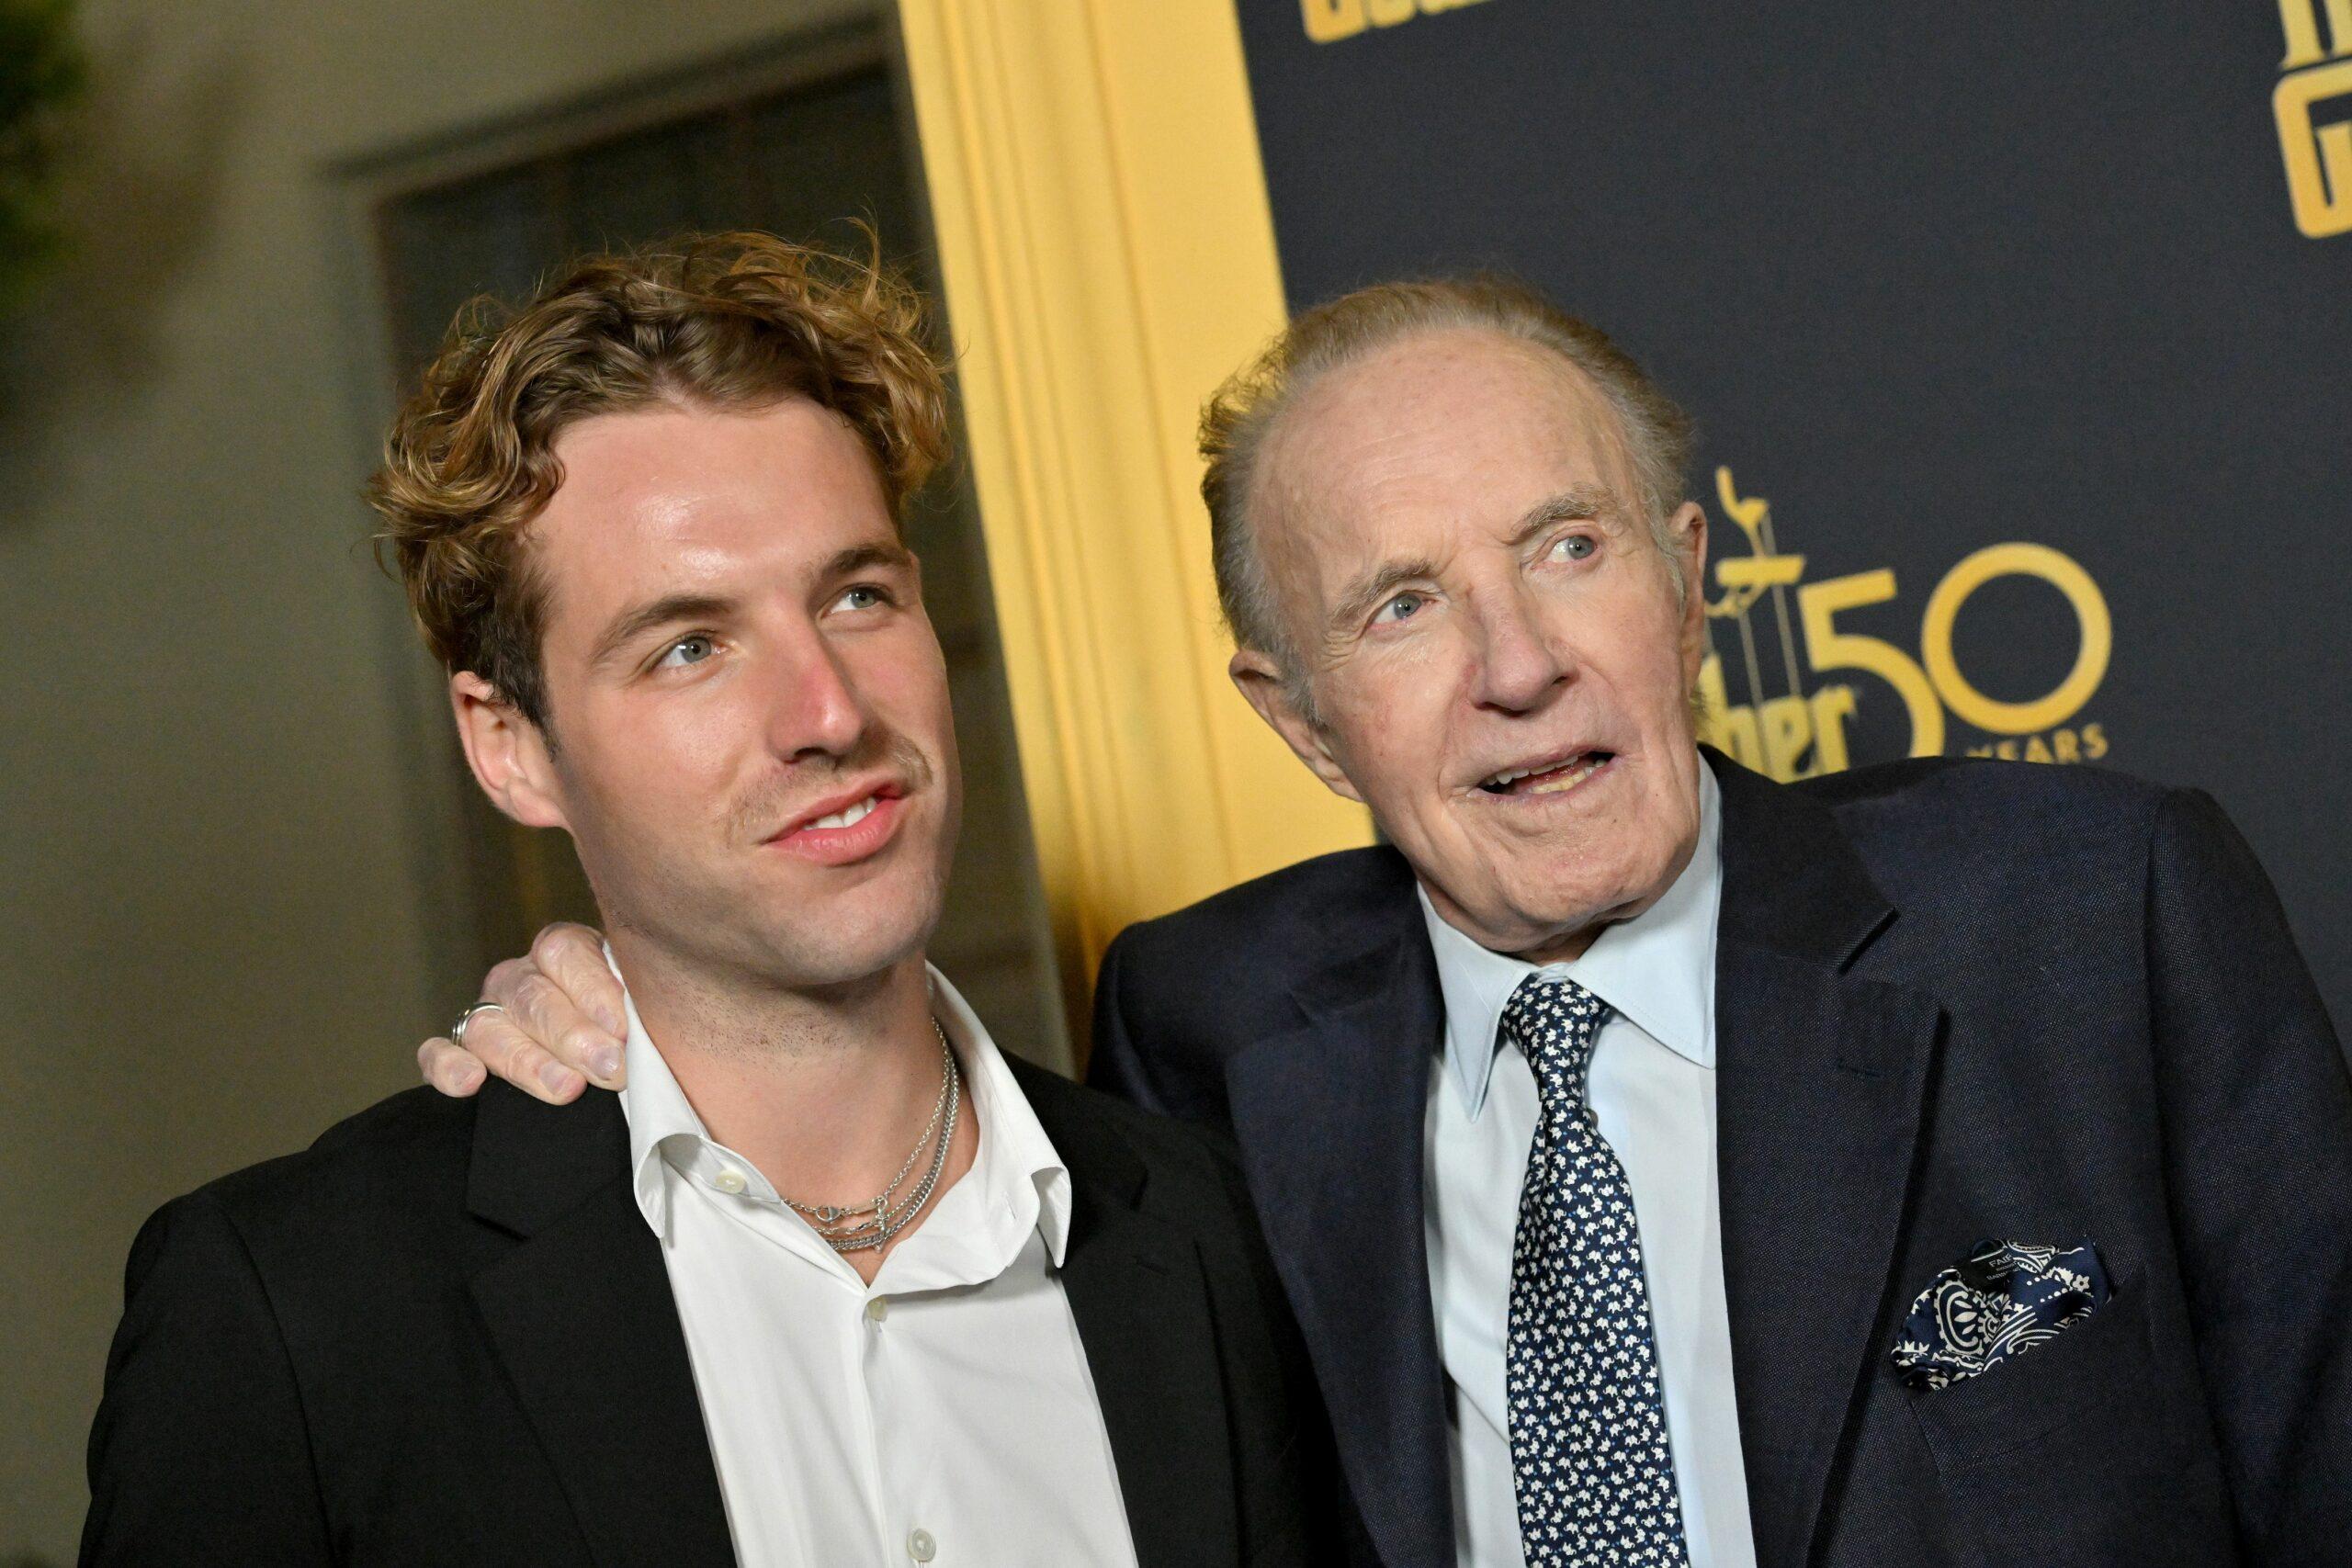 James Caan at the "The Godfather" 50th Anniversary Celebration